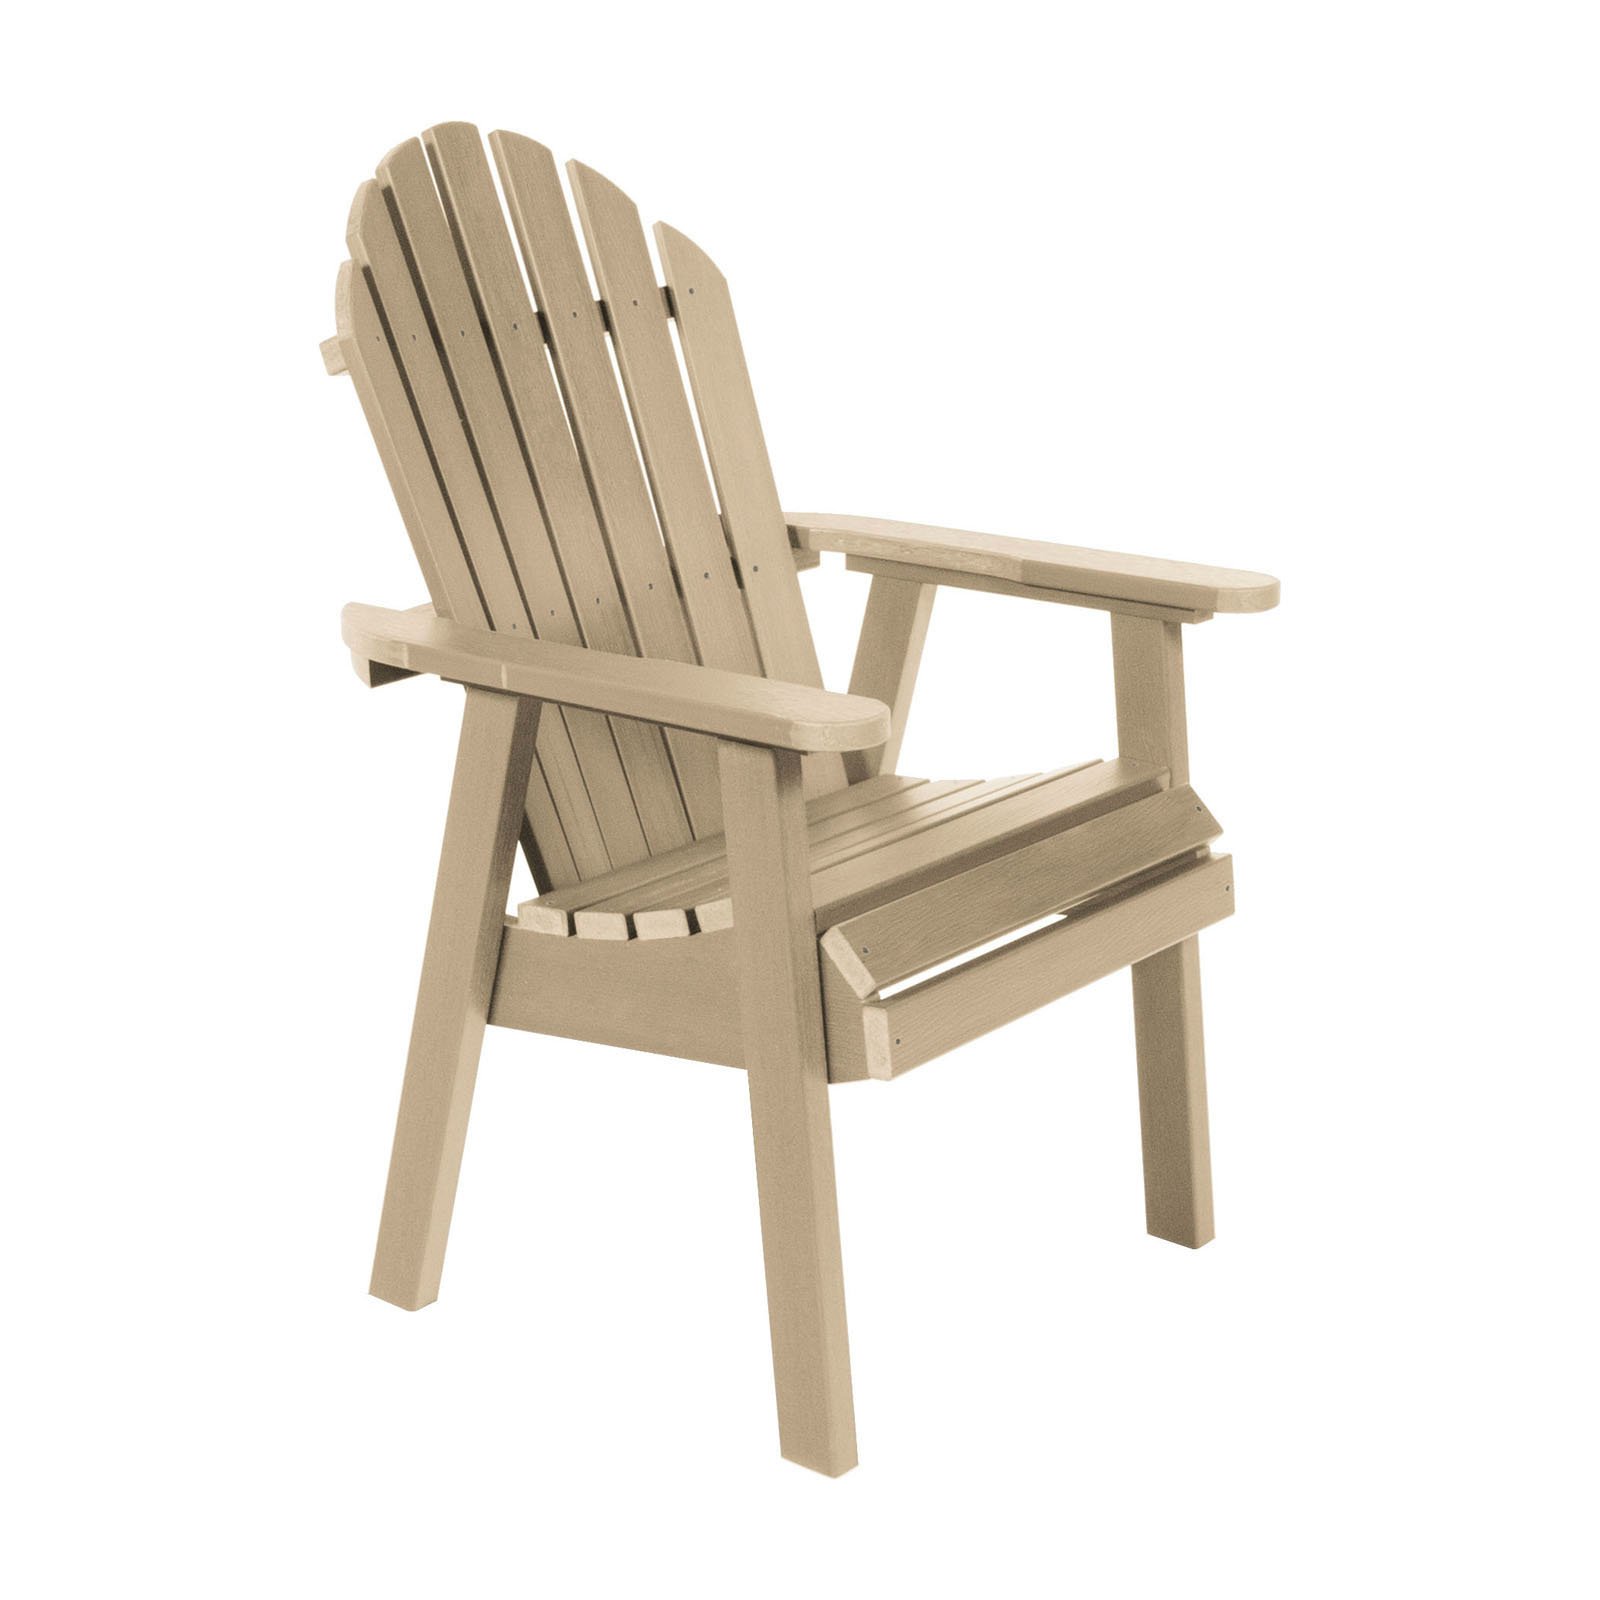 The Sequoia Professional Commercial Grade Muskoka Adirondack Deck Dining Chair - image 1 of 2